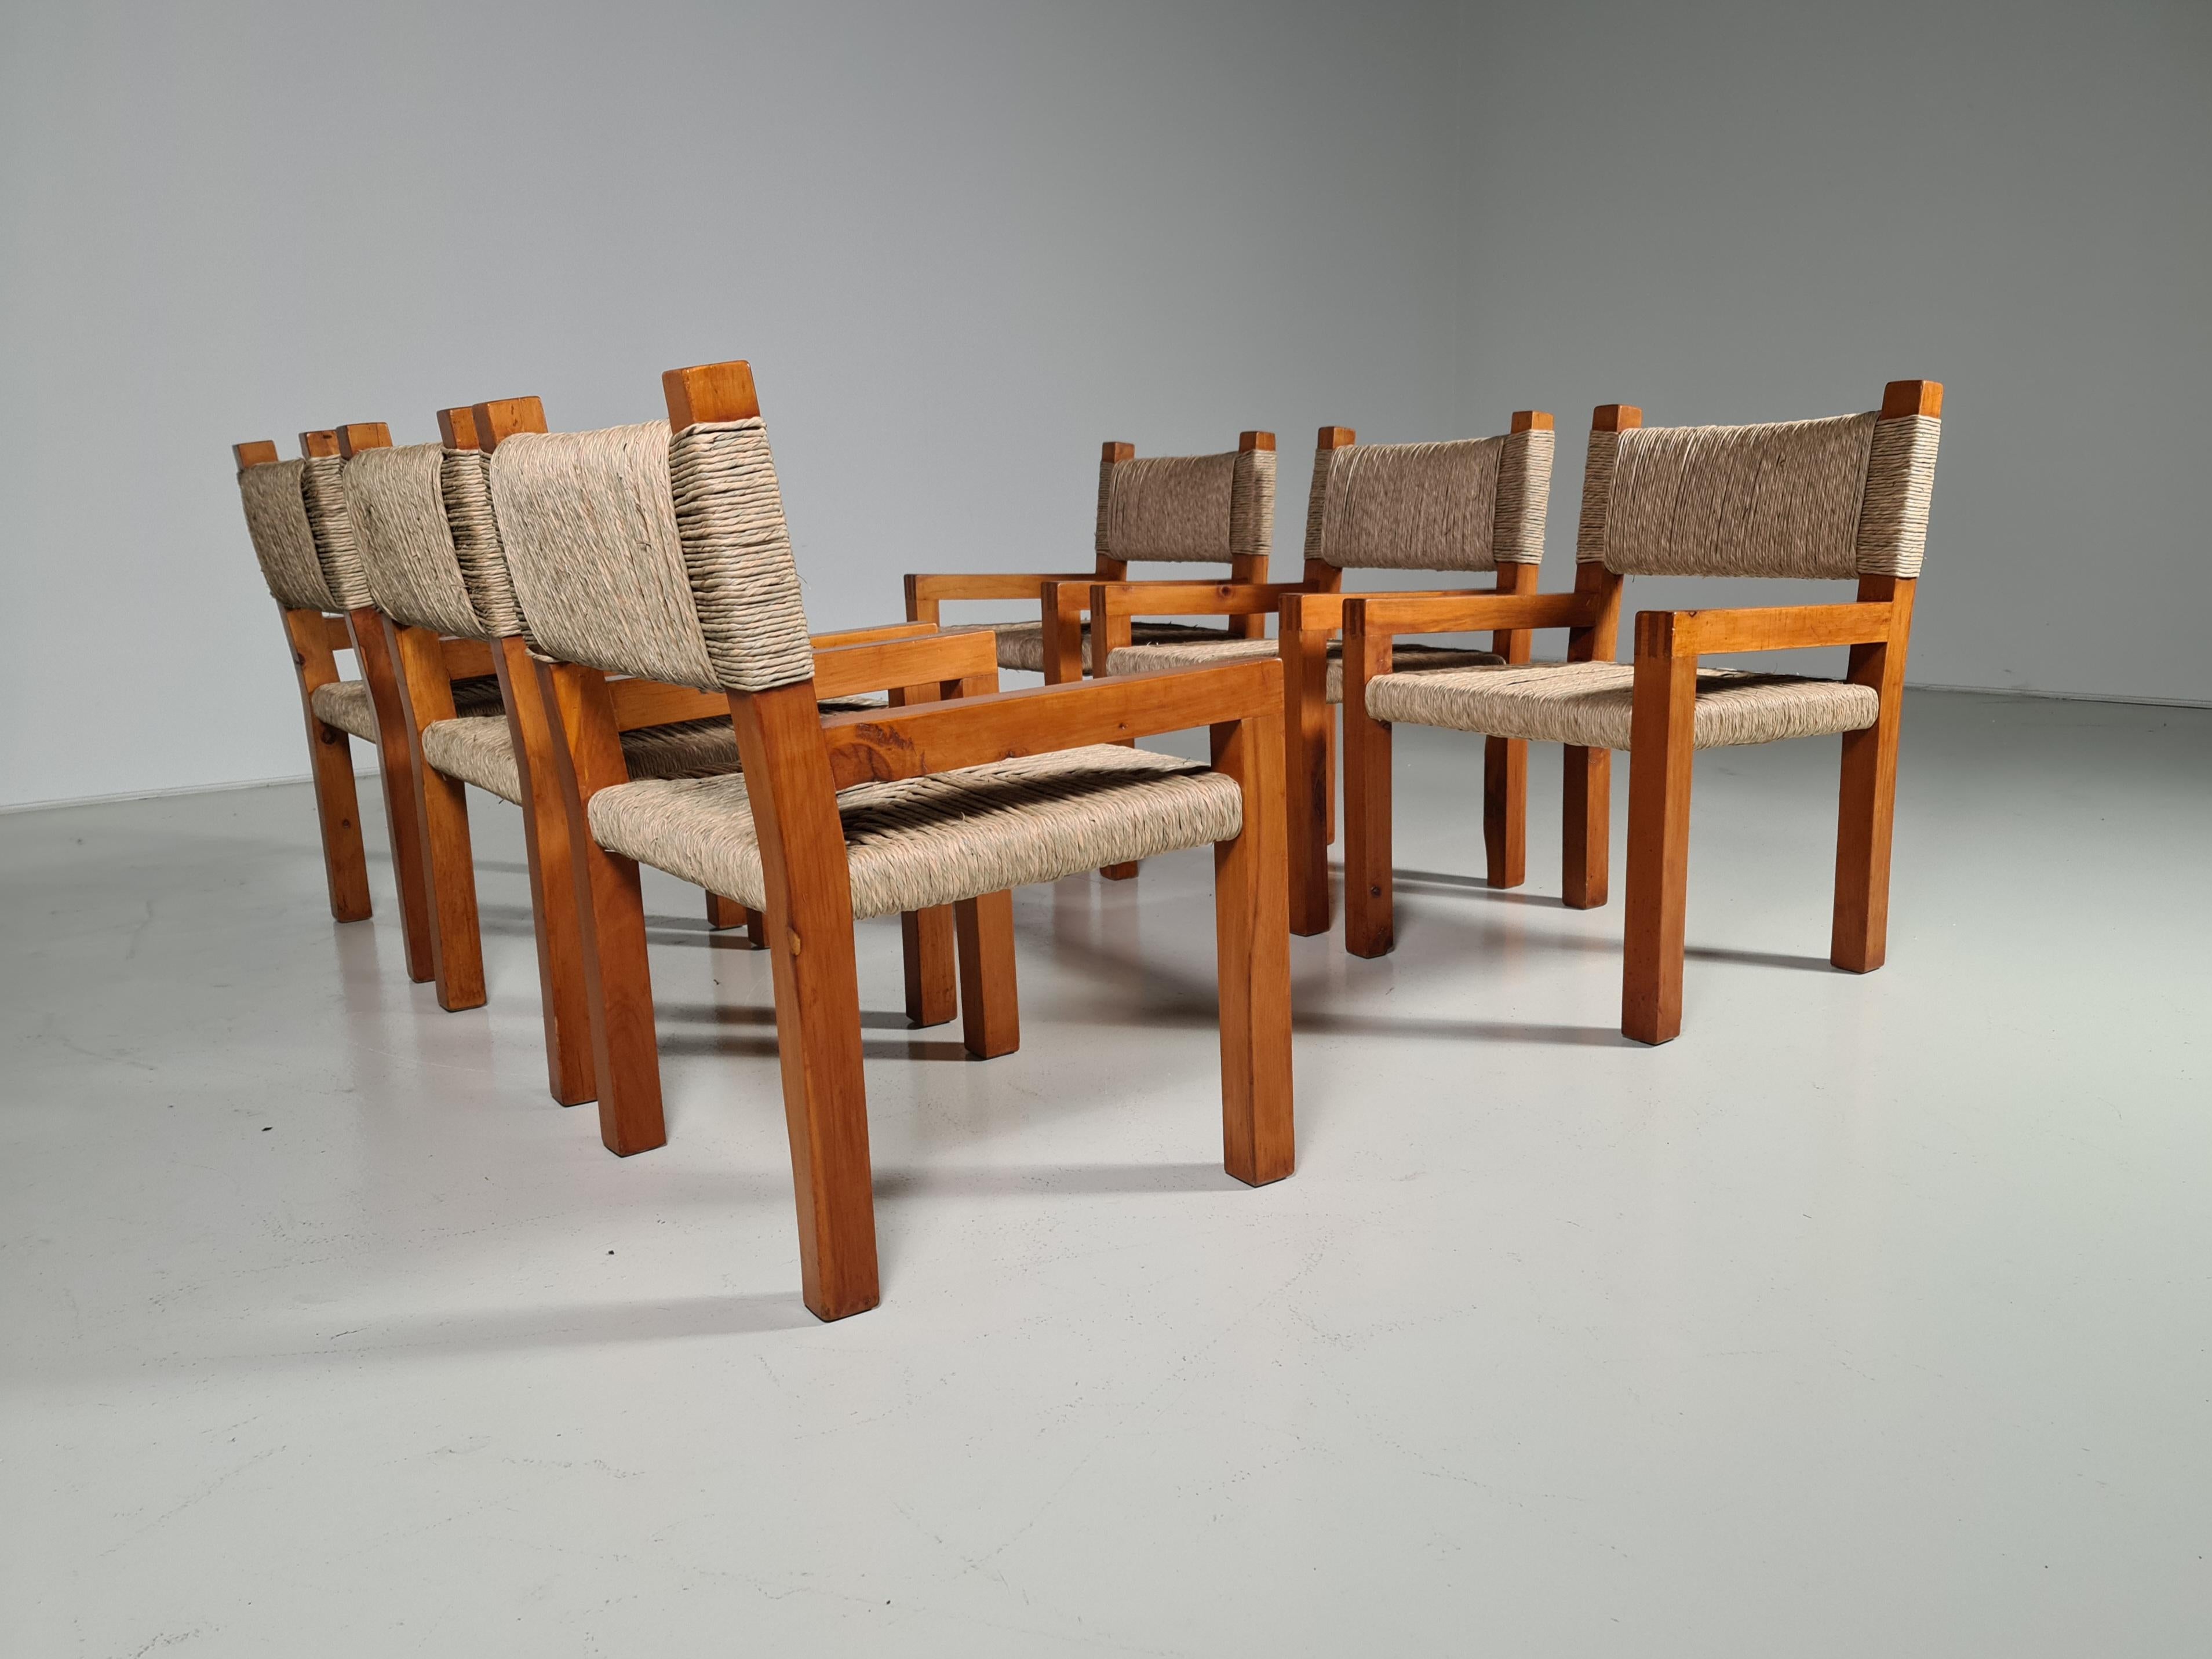 Rare set of pine dining chairs with woven paper cord seats. The elegant designed open shape of the frame in combination with the naturally colored seats makes this chair very versatile for any type of interior. The design looks simplistic, yet these